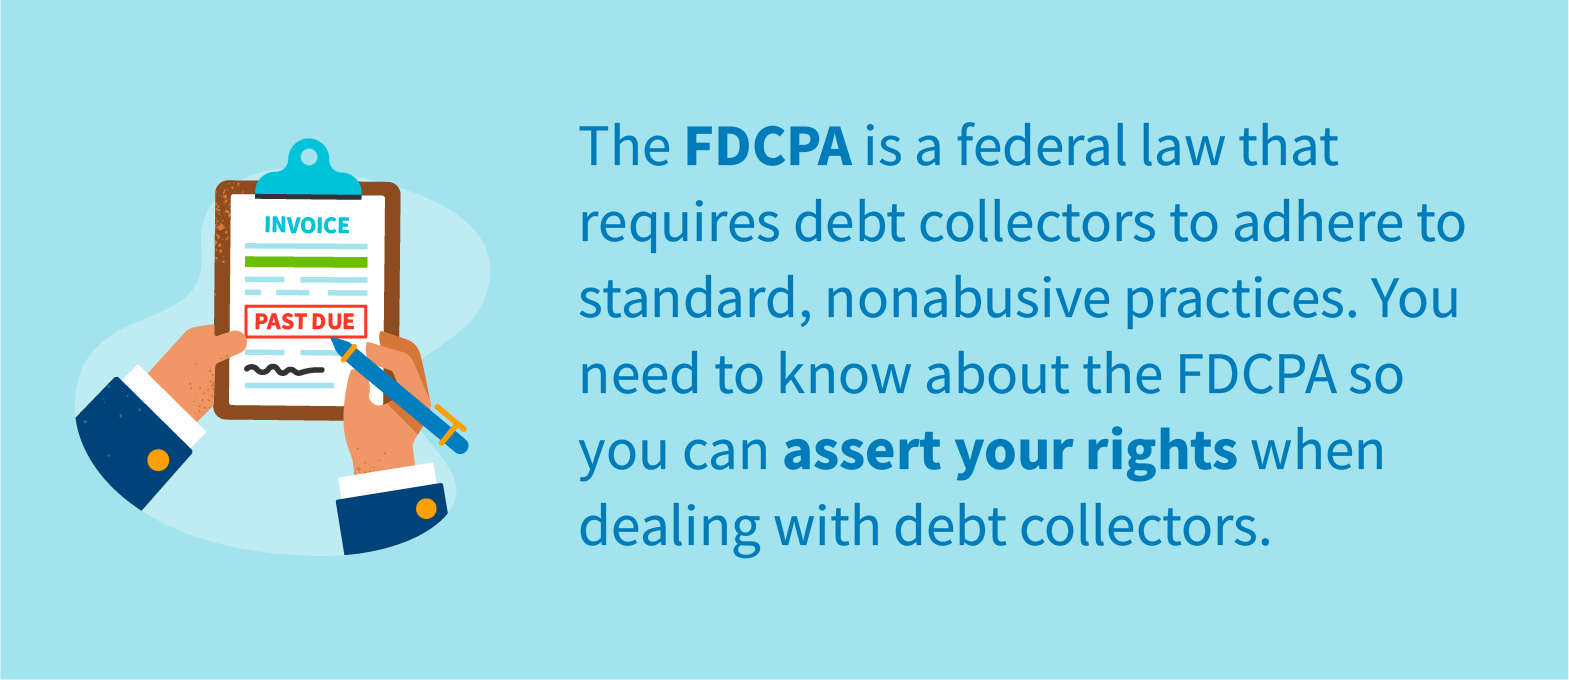 The FDCPA is a federal law that requires debt collectors to adhere to standard, nonabusive practices. You need to know about the FDCPA so you can assert your rights when dealing with debt collectors.